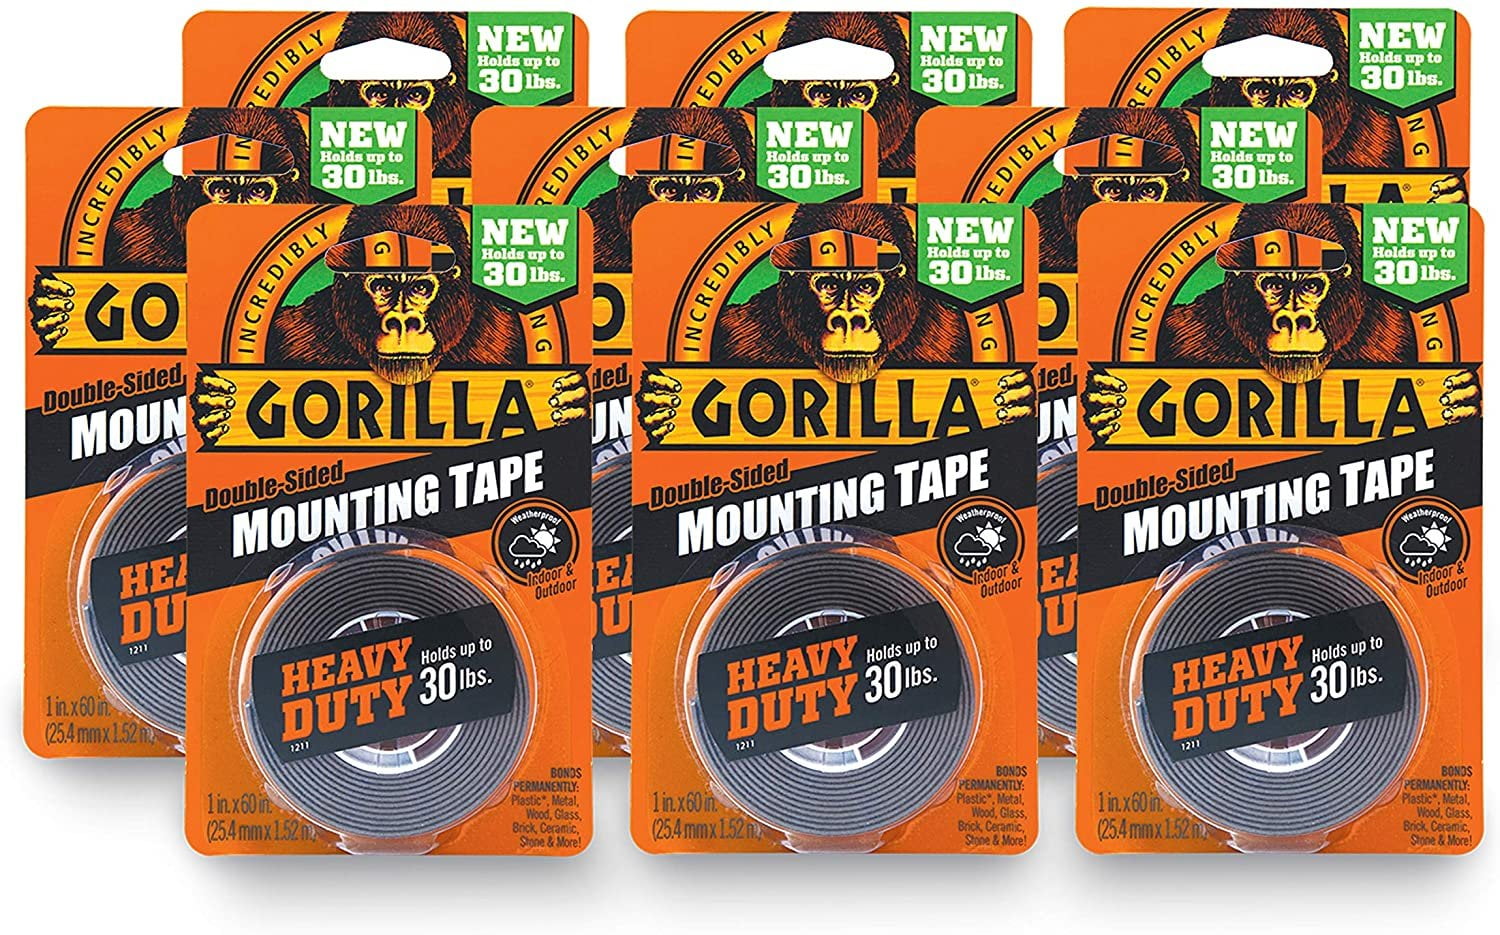 Gorilla Heavy Duty Double Sided Mounting Tape, 1 x 60, Black, Pack of 9 